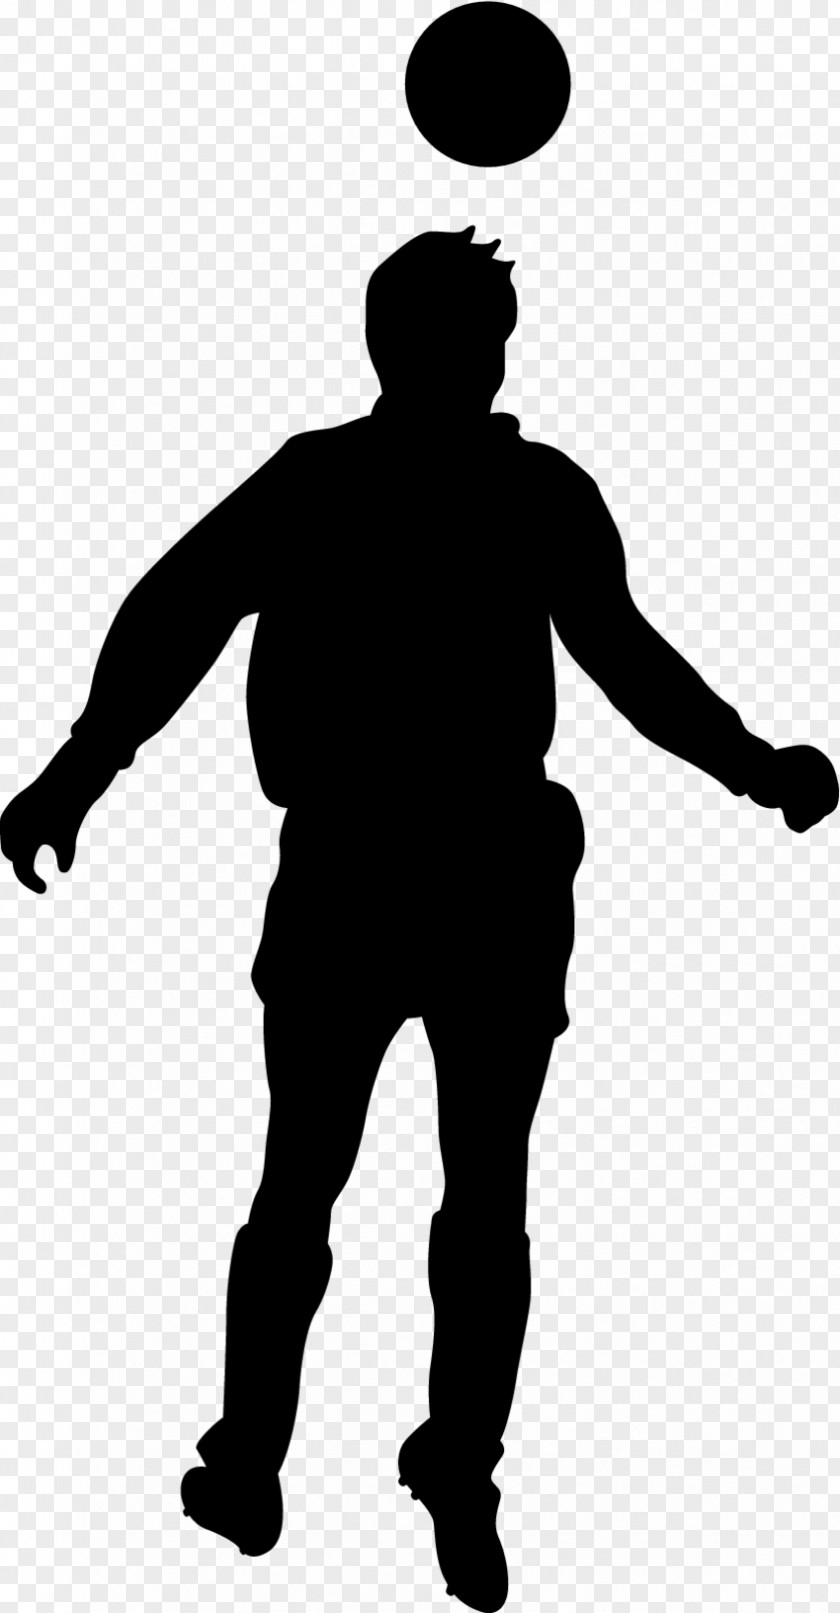 Football Player Wall Decal Silhouette PNG